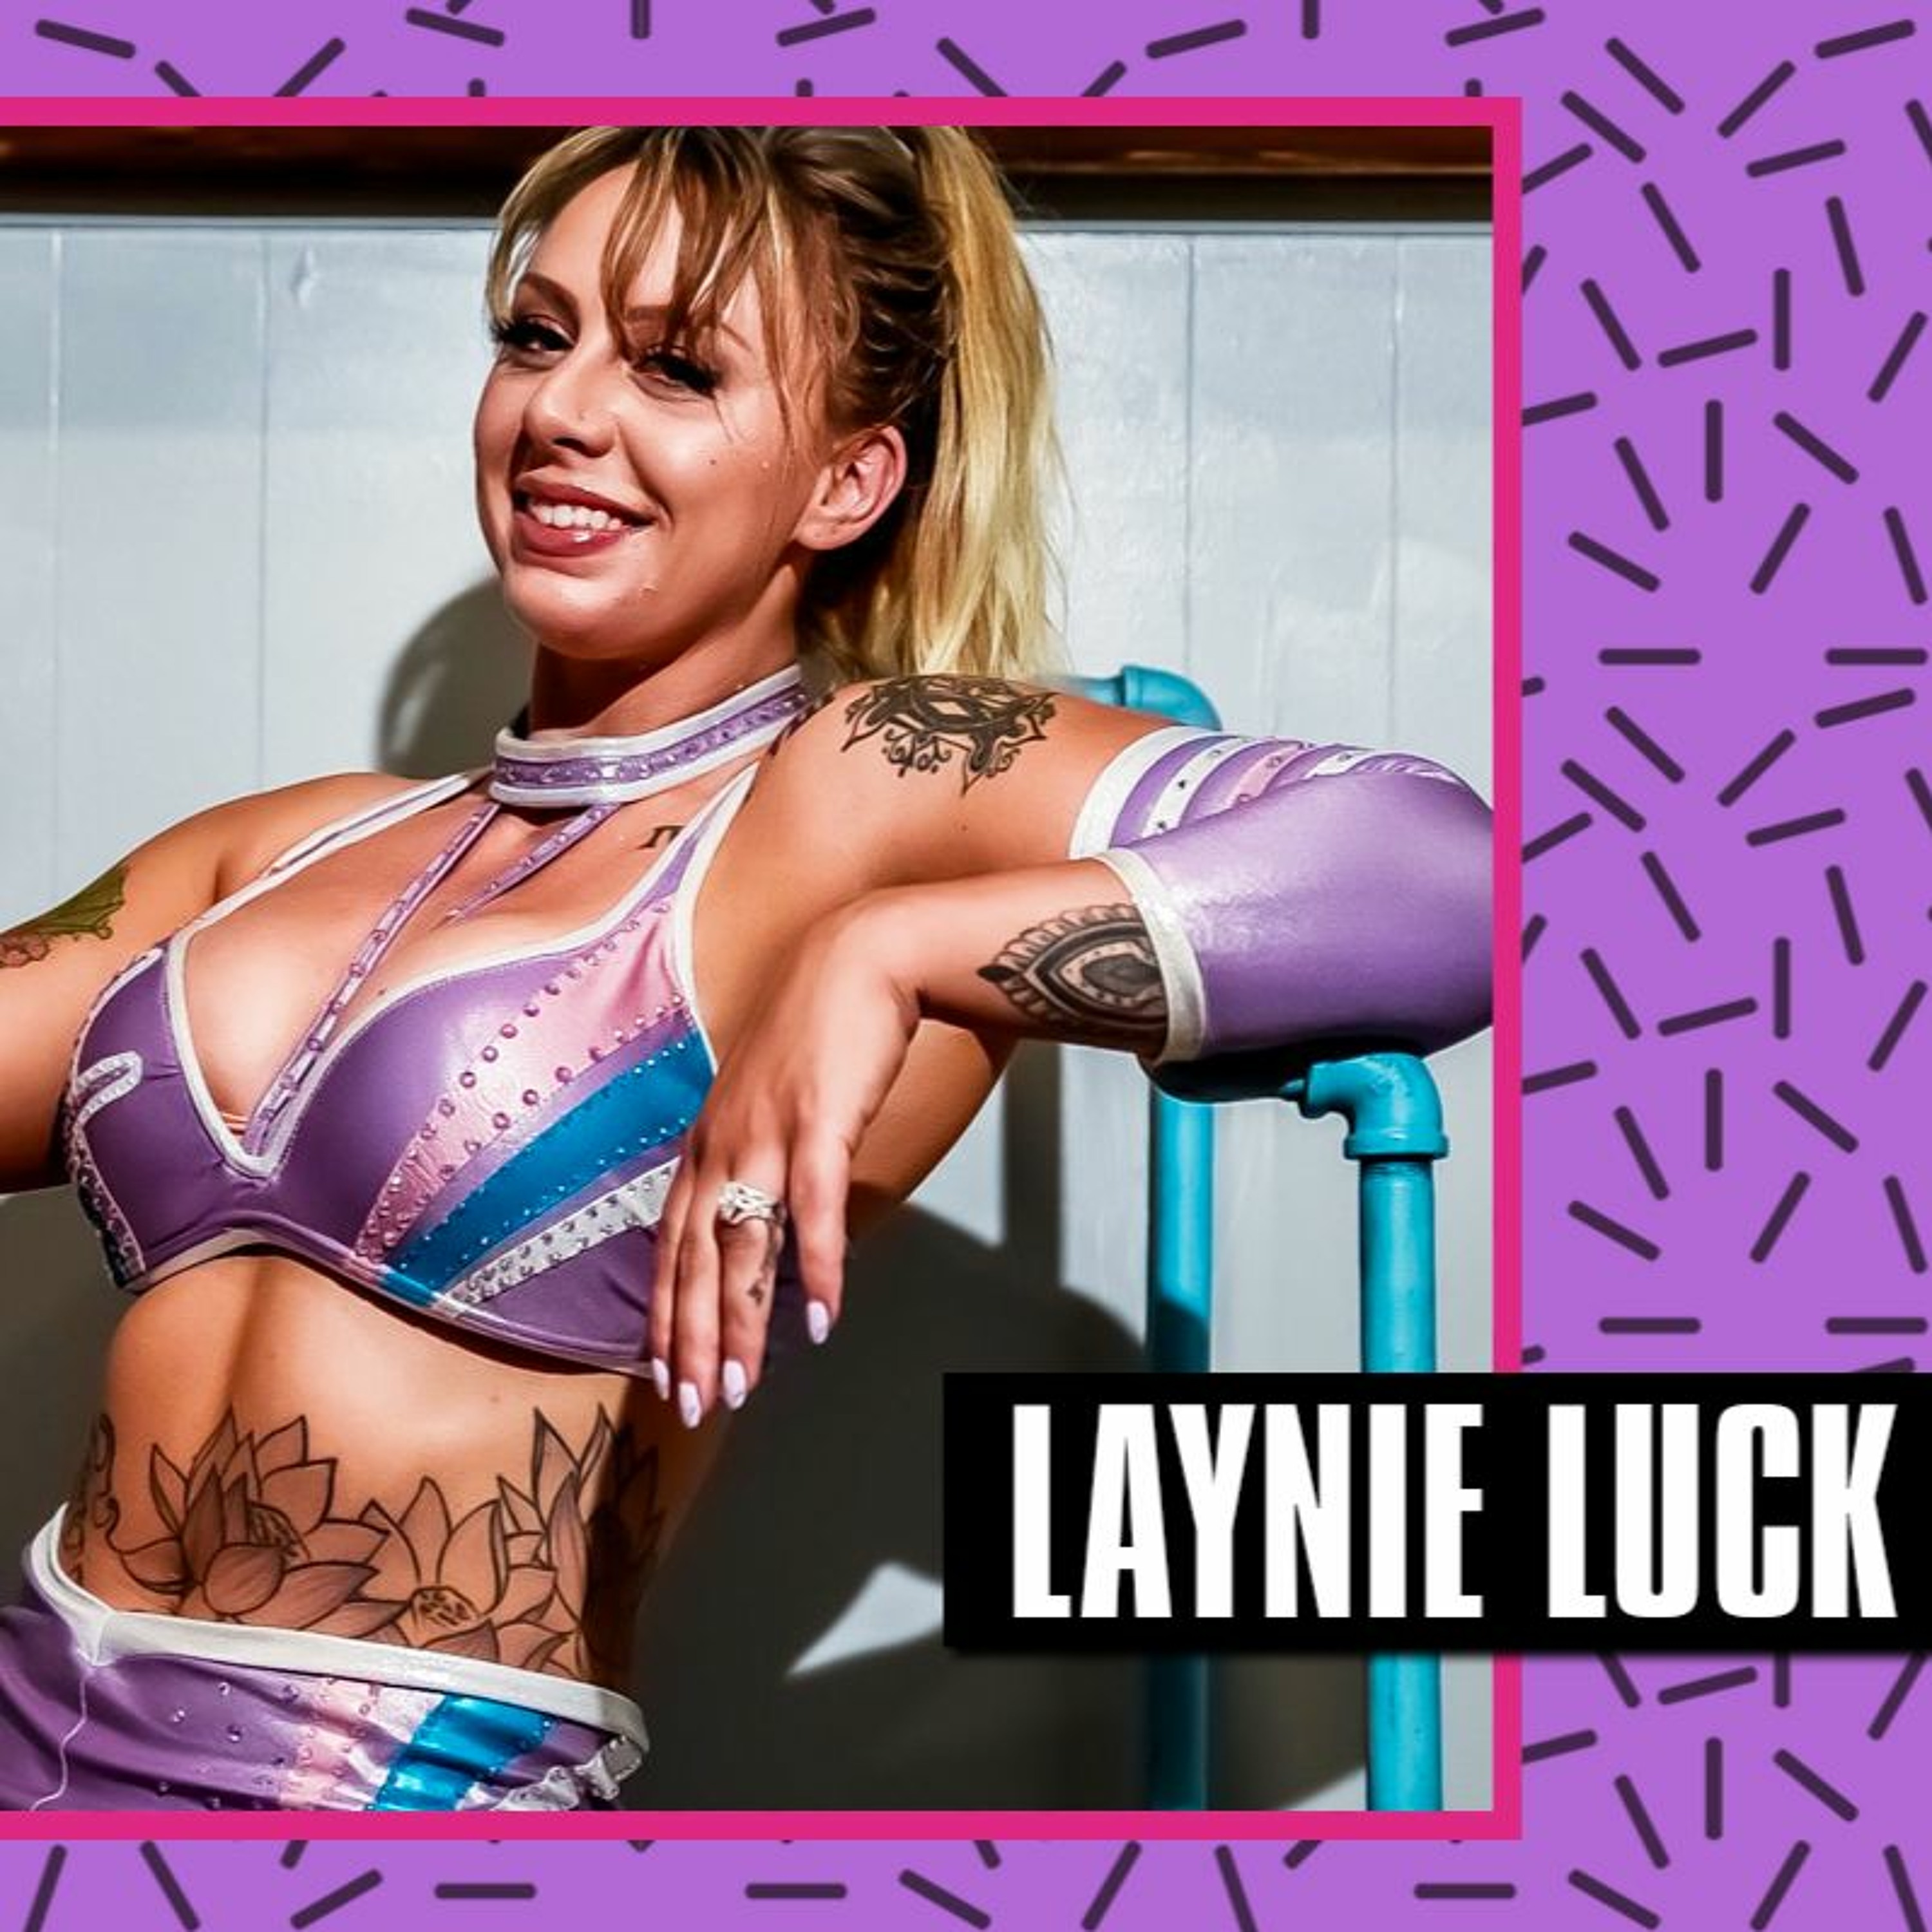 Laynie Luck reflects on working with Athena, tag title win with her husband